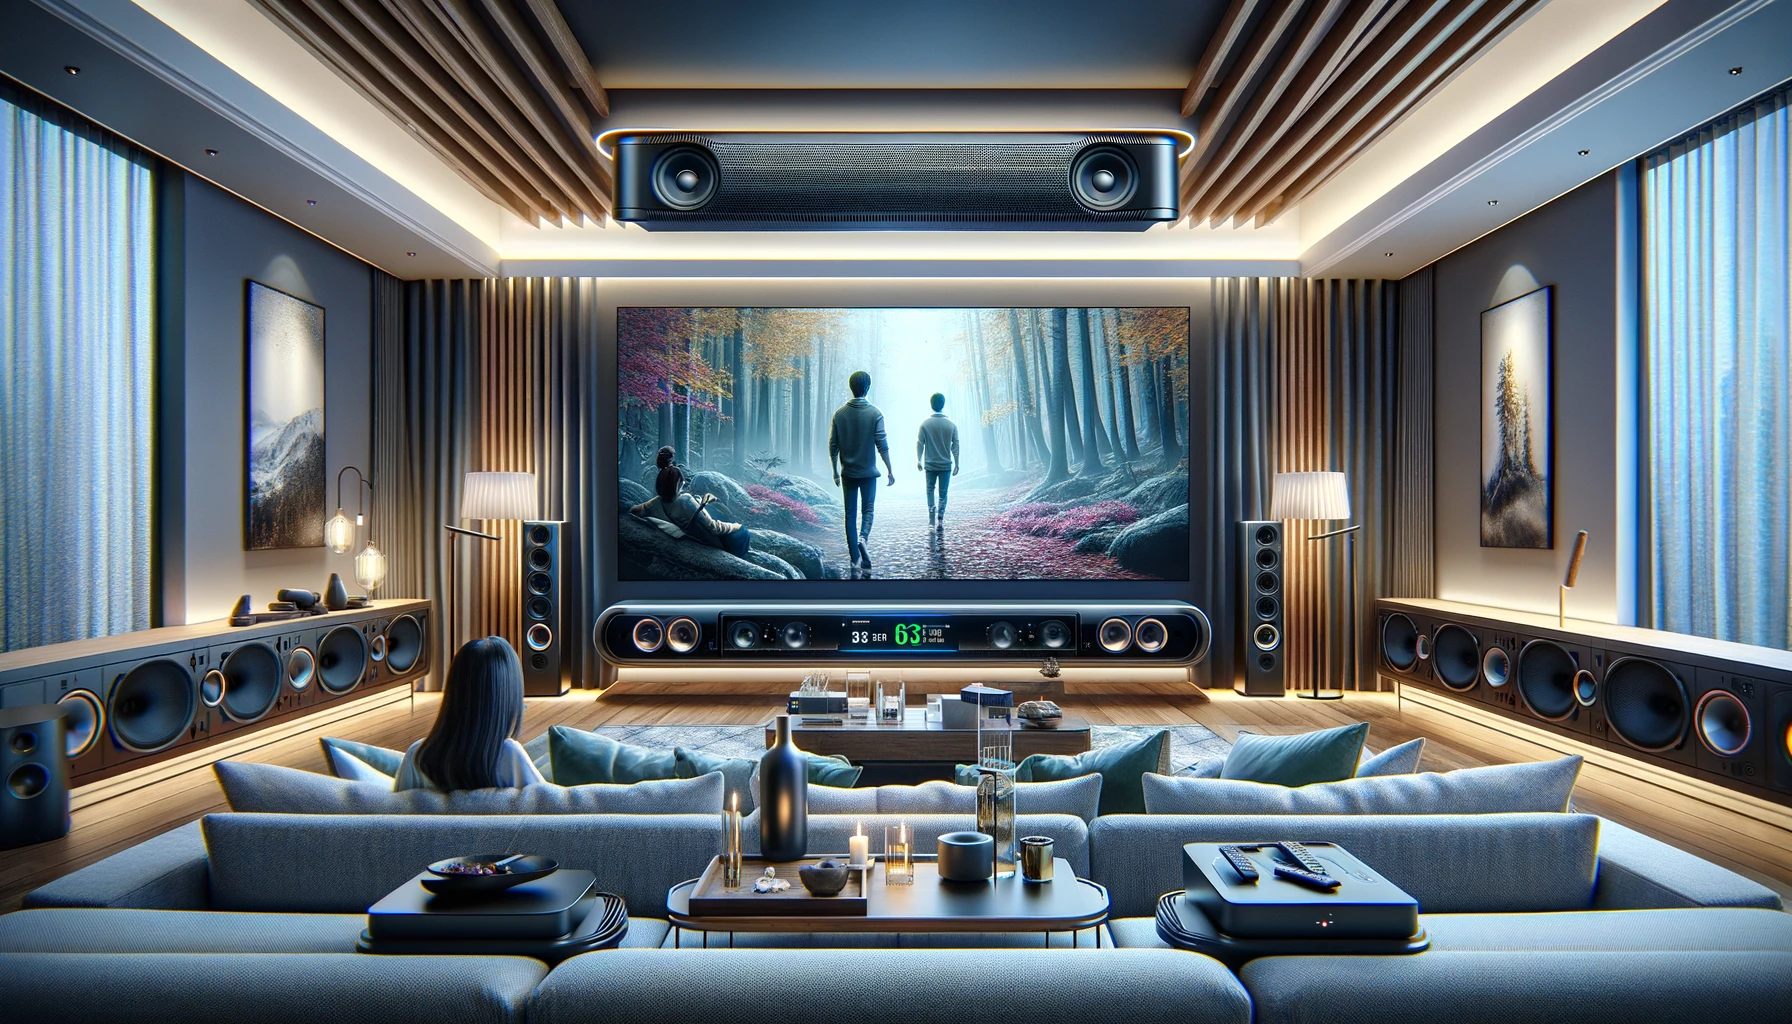 Modern home theater room with large screen and speakers.